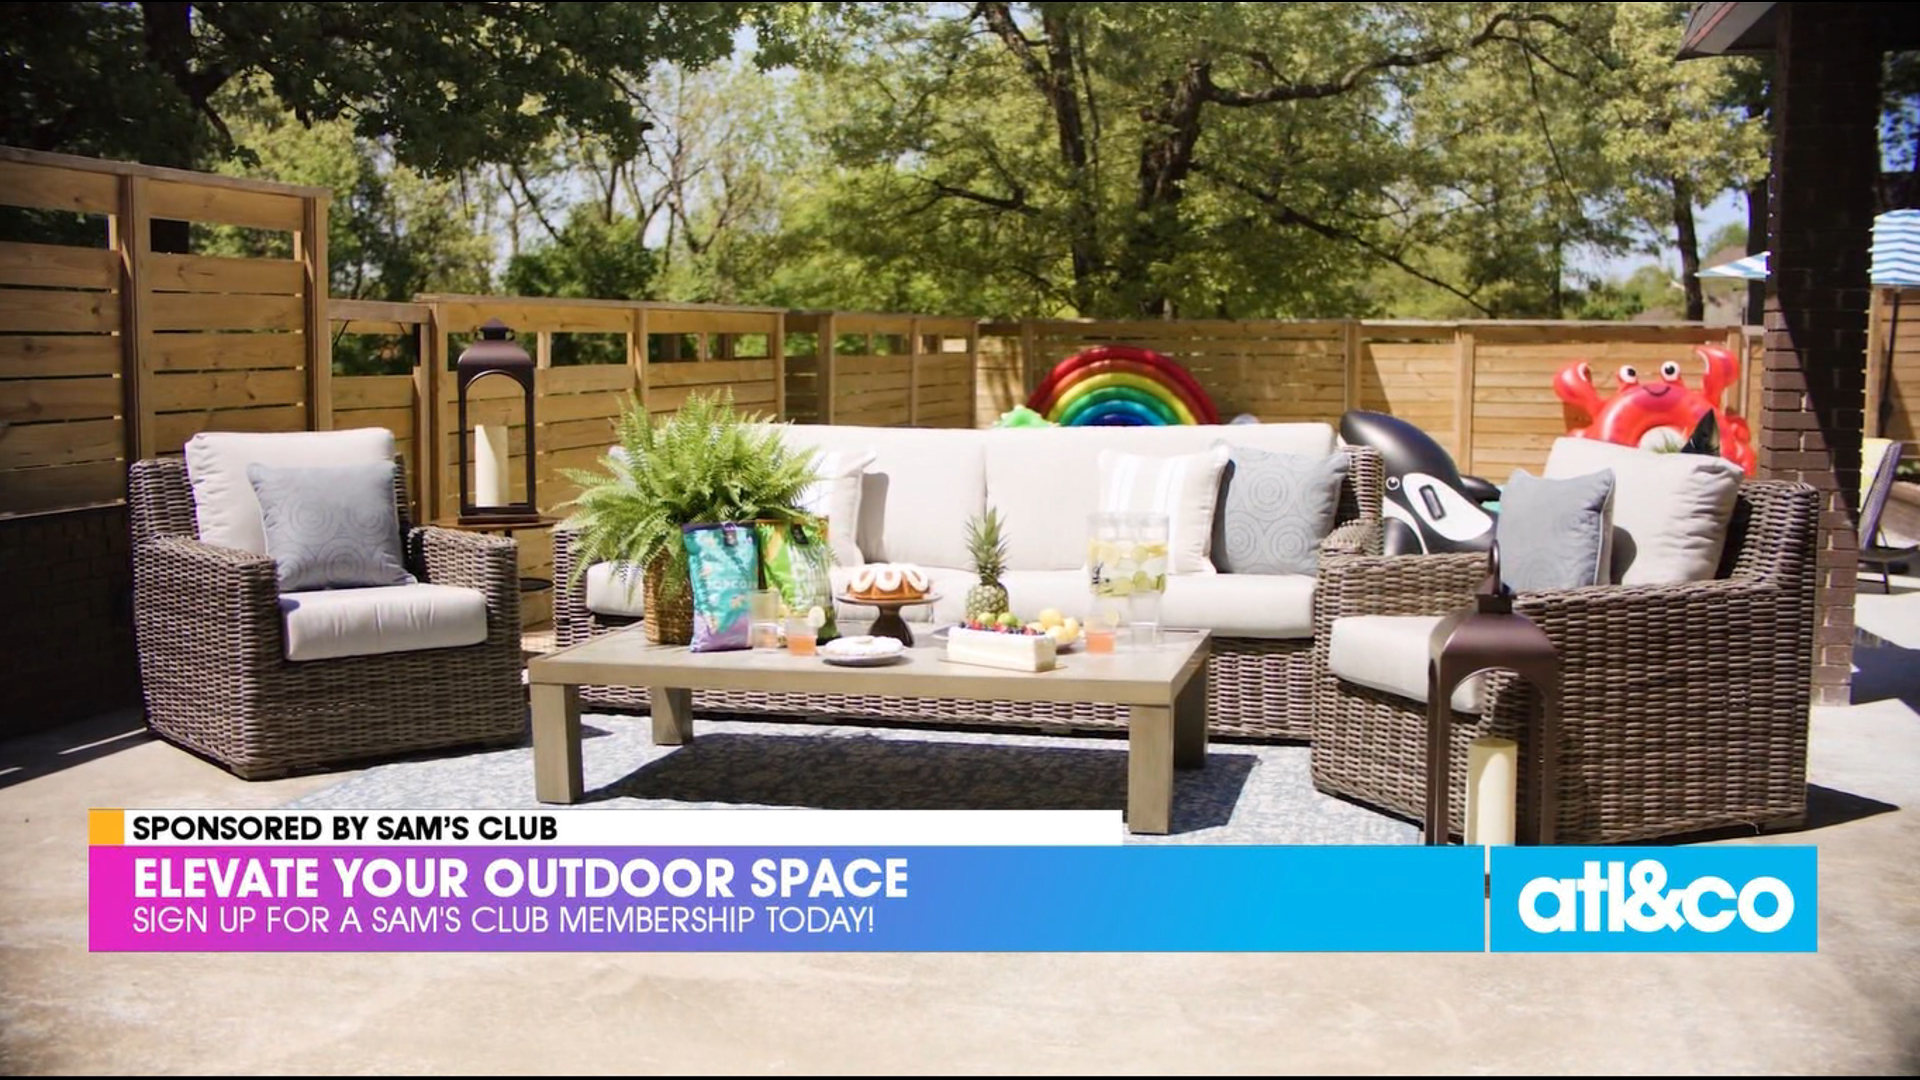 Stock up on food, furniture, and games to elevate your outdoor space this summer with Sam's Club.